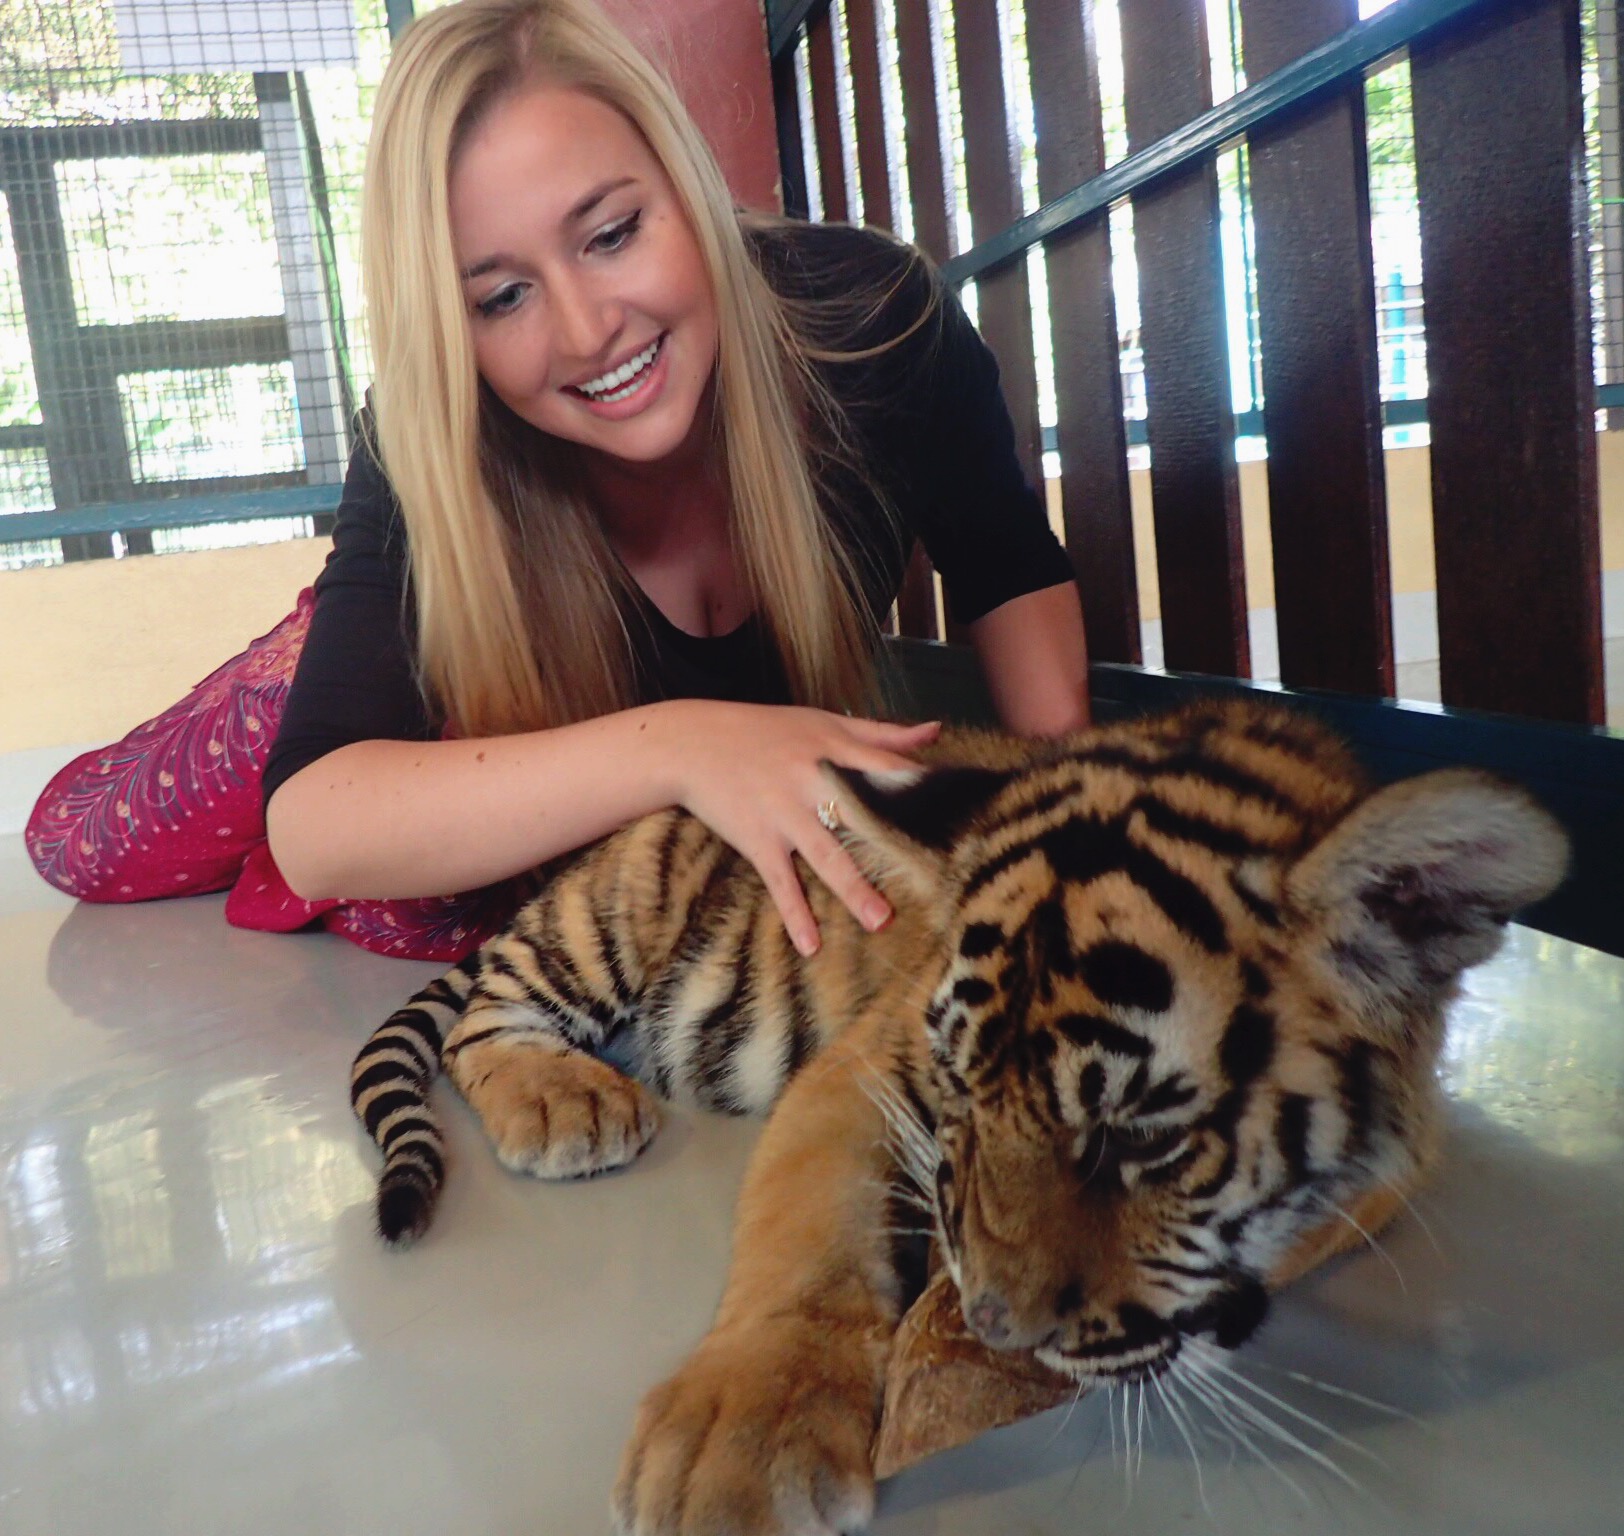 Playing with tigers in Thailand